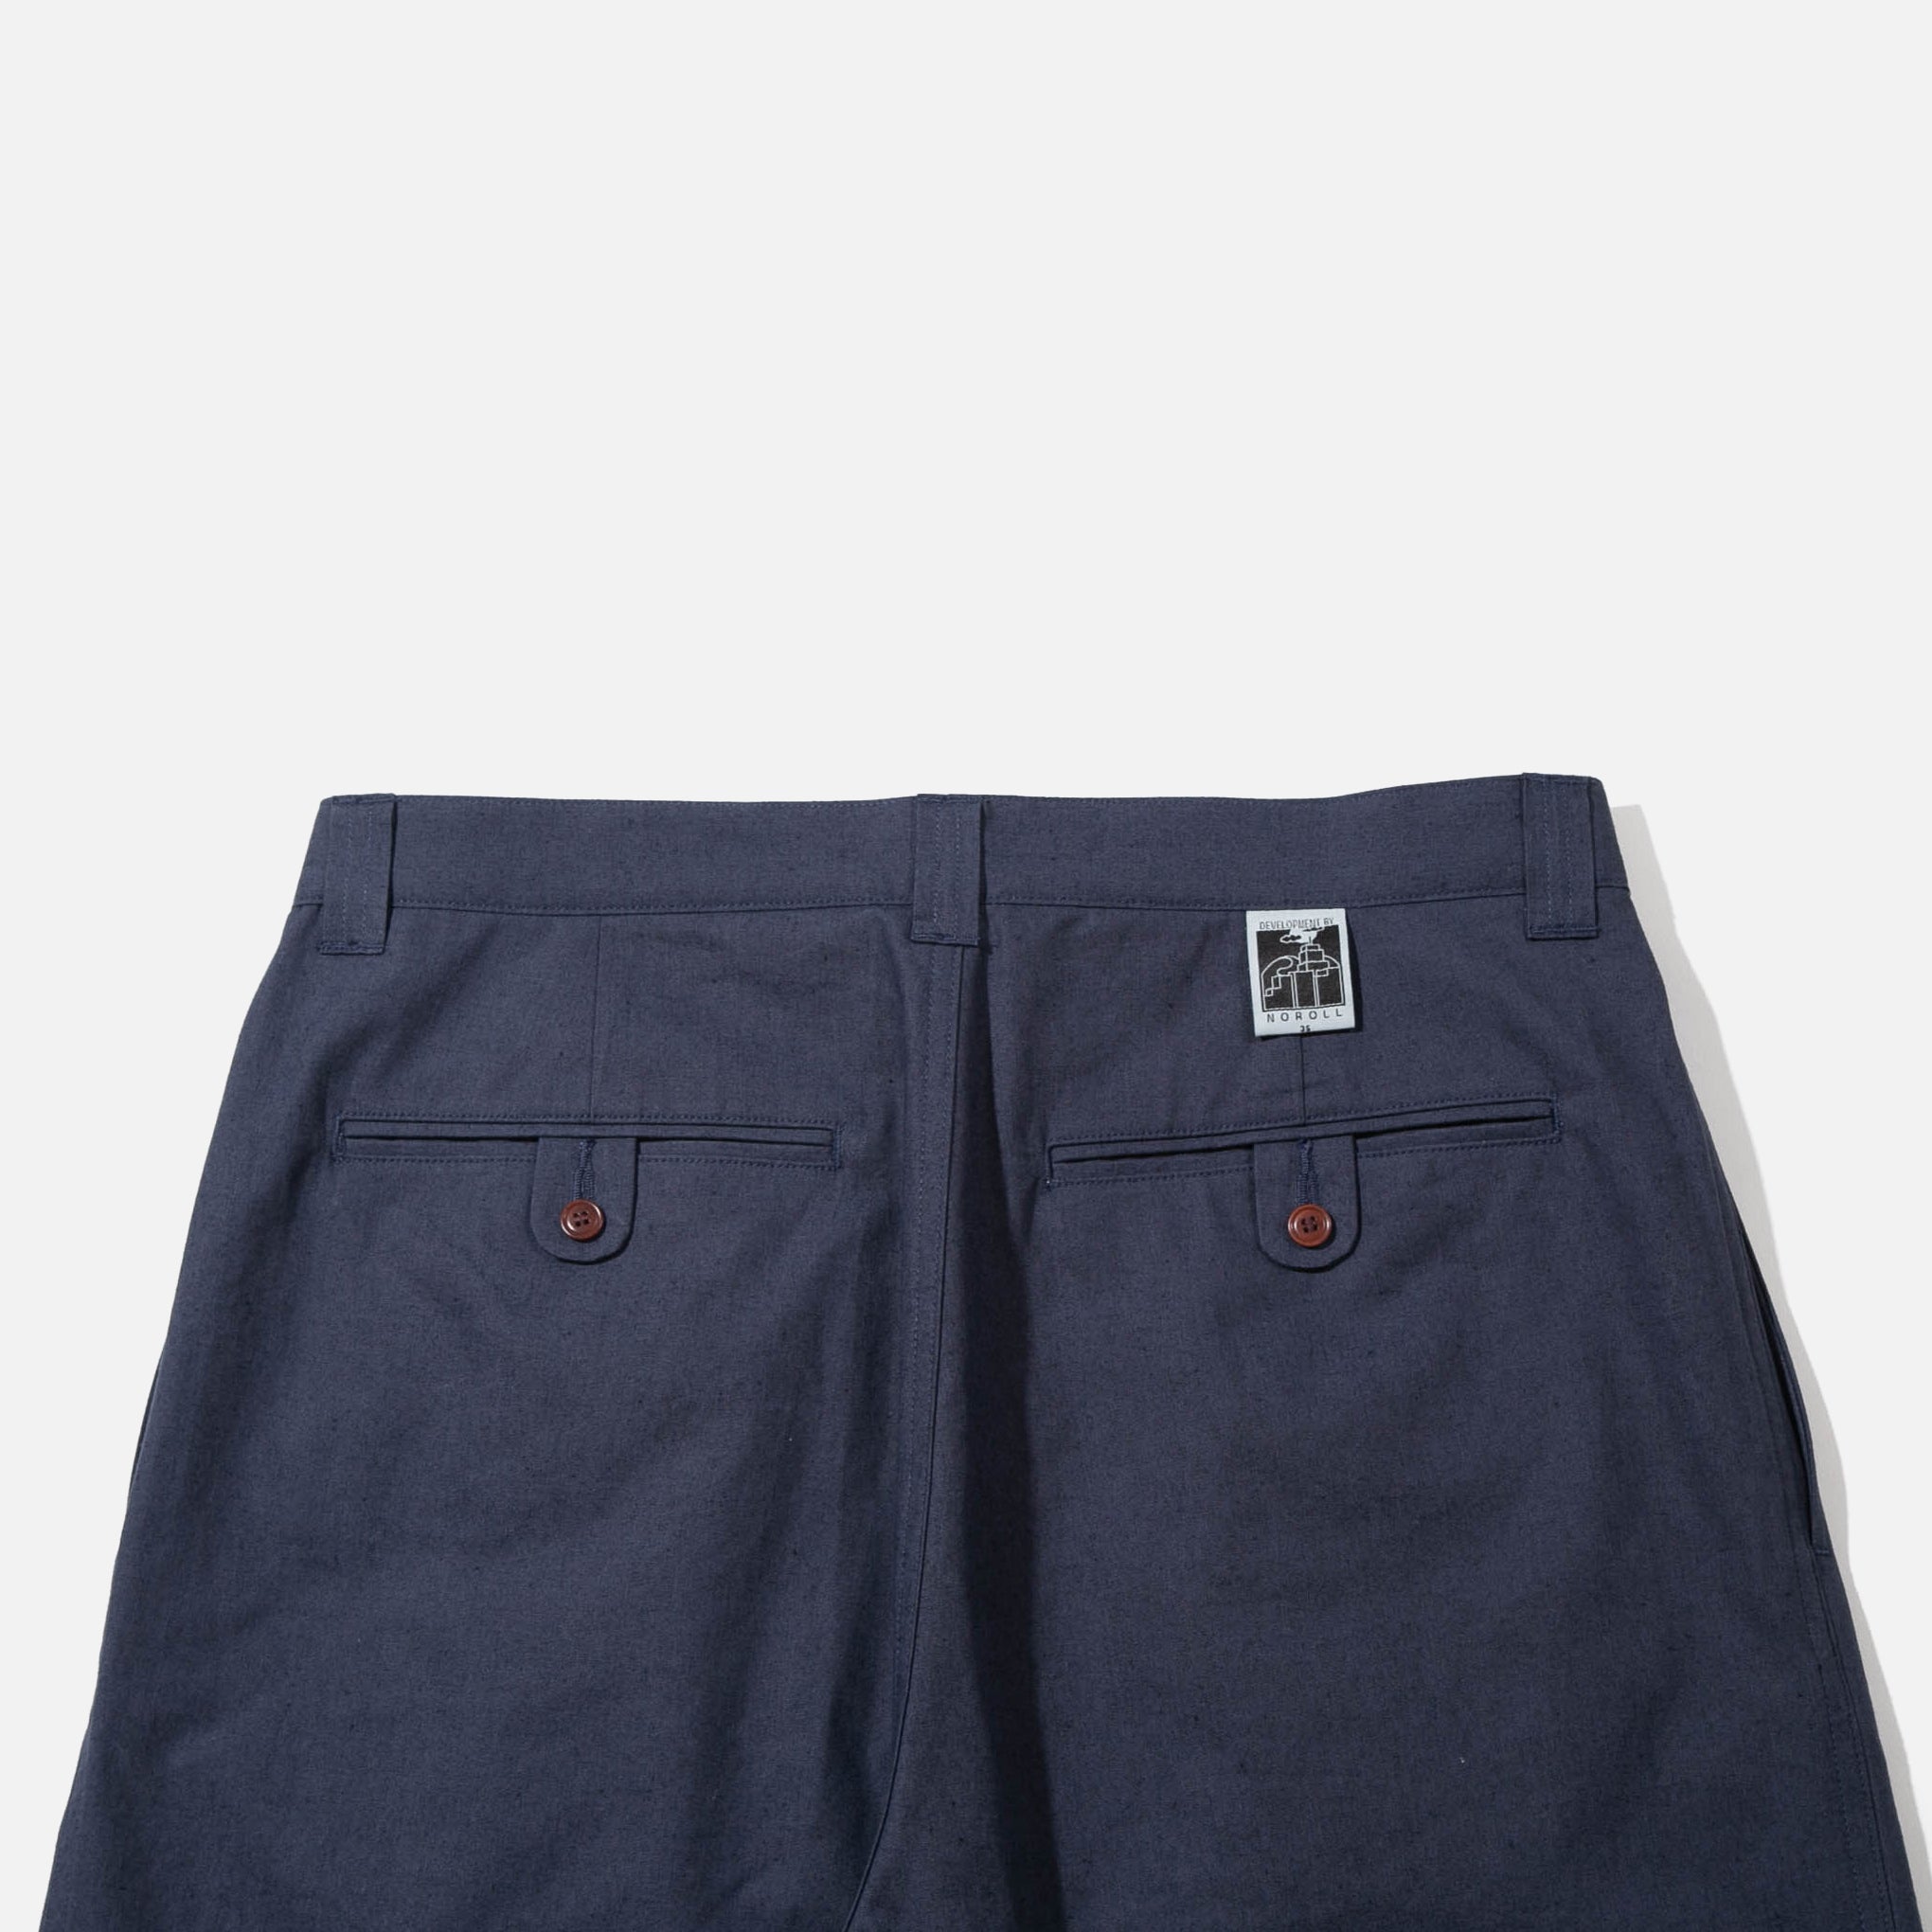 Thickwalk C/L Pants in Navy from Noroll | Blues Store